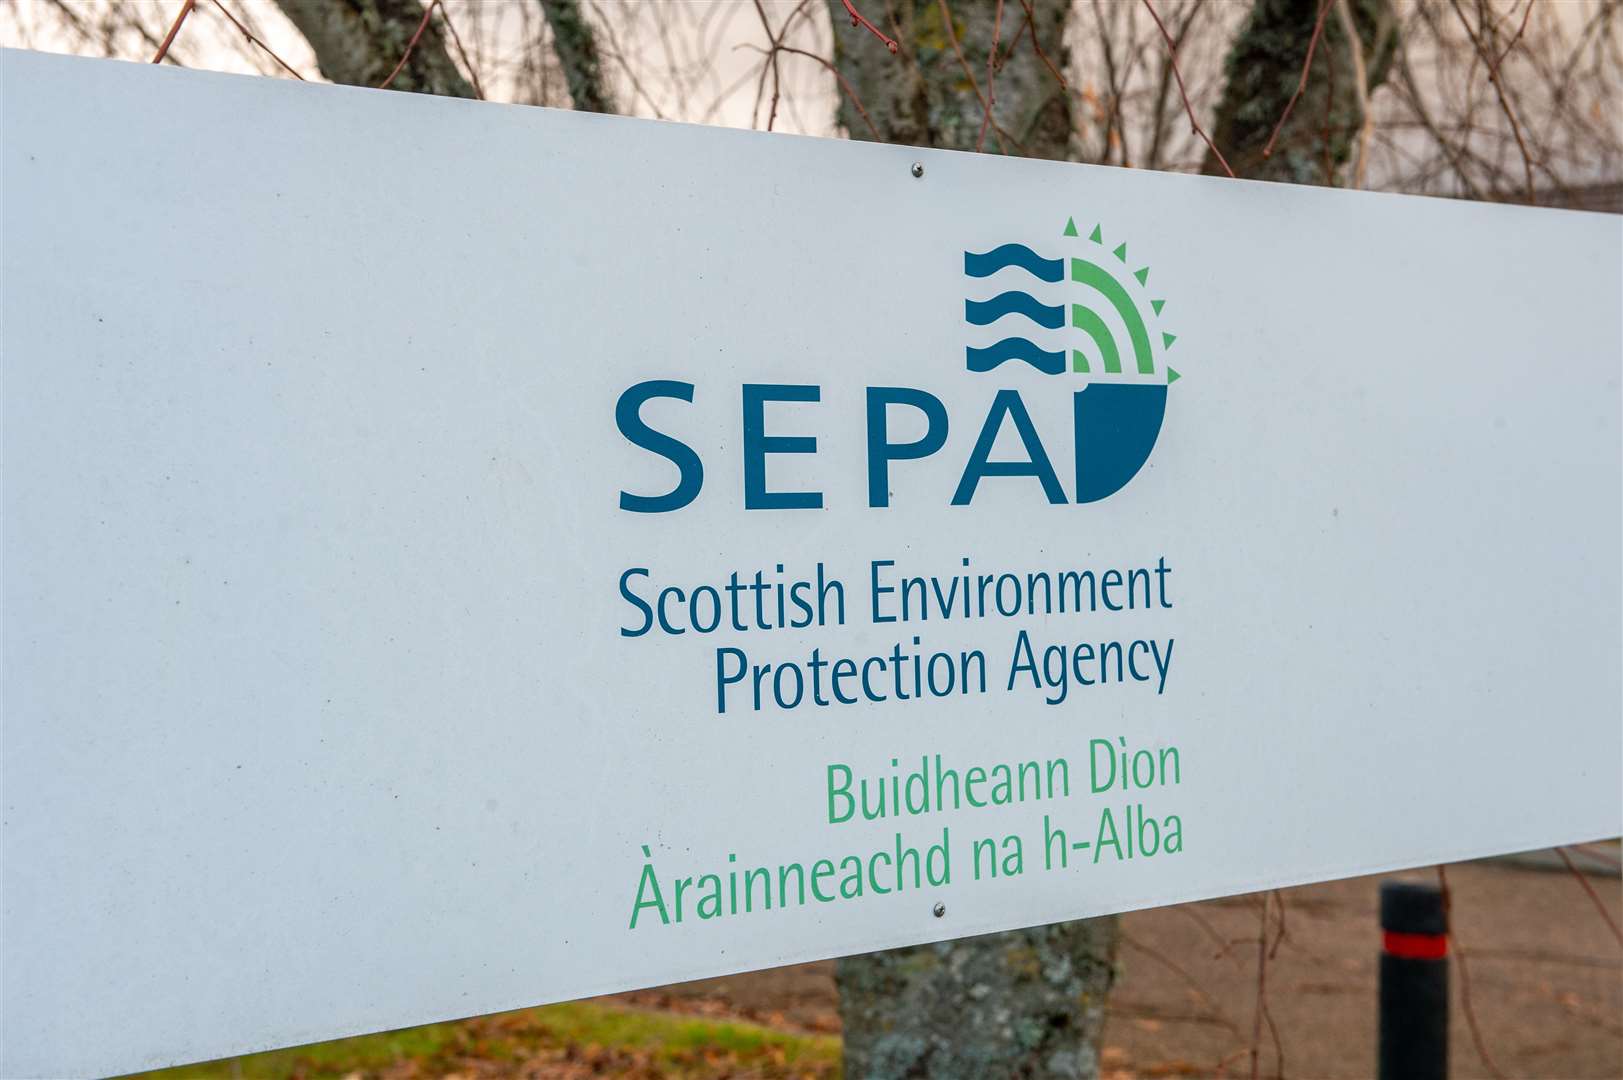 SEPA said it aimed to be transparent and proportionate in its enforcement.